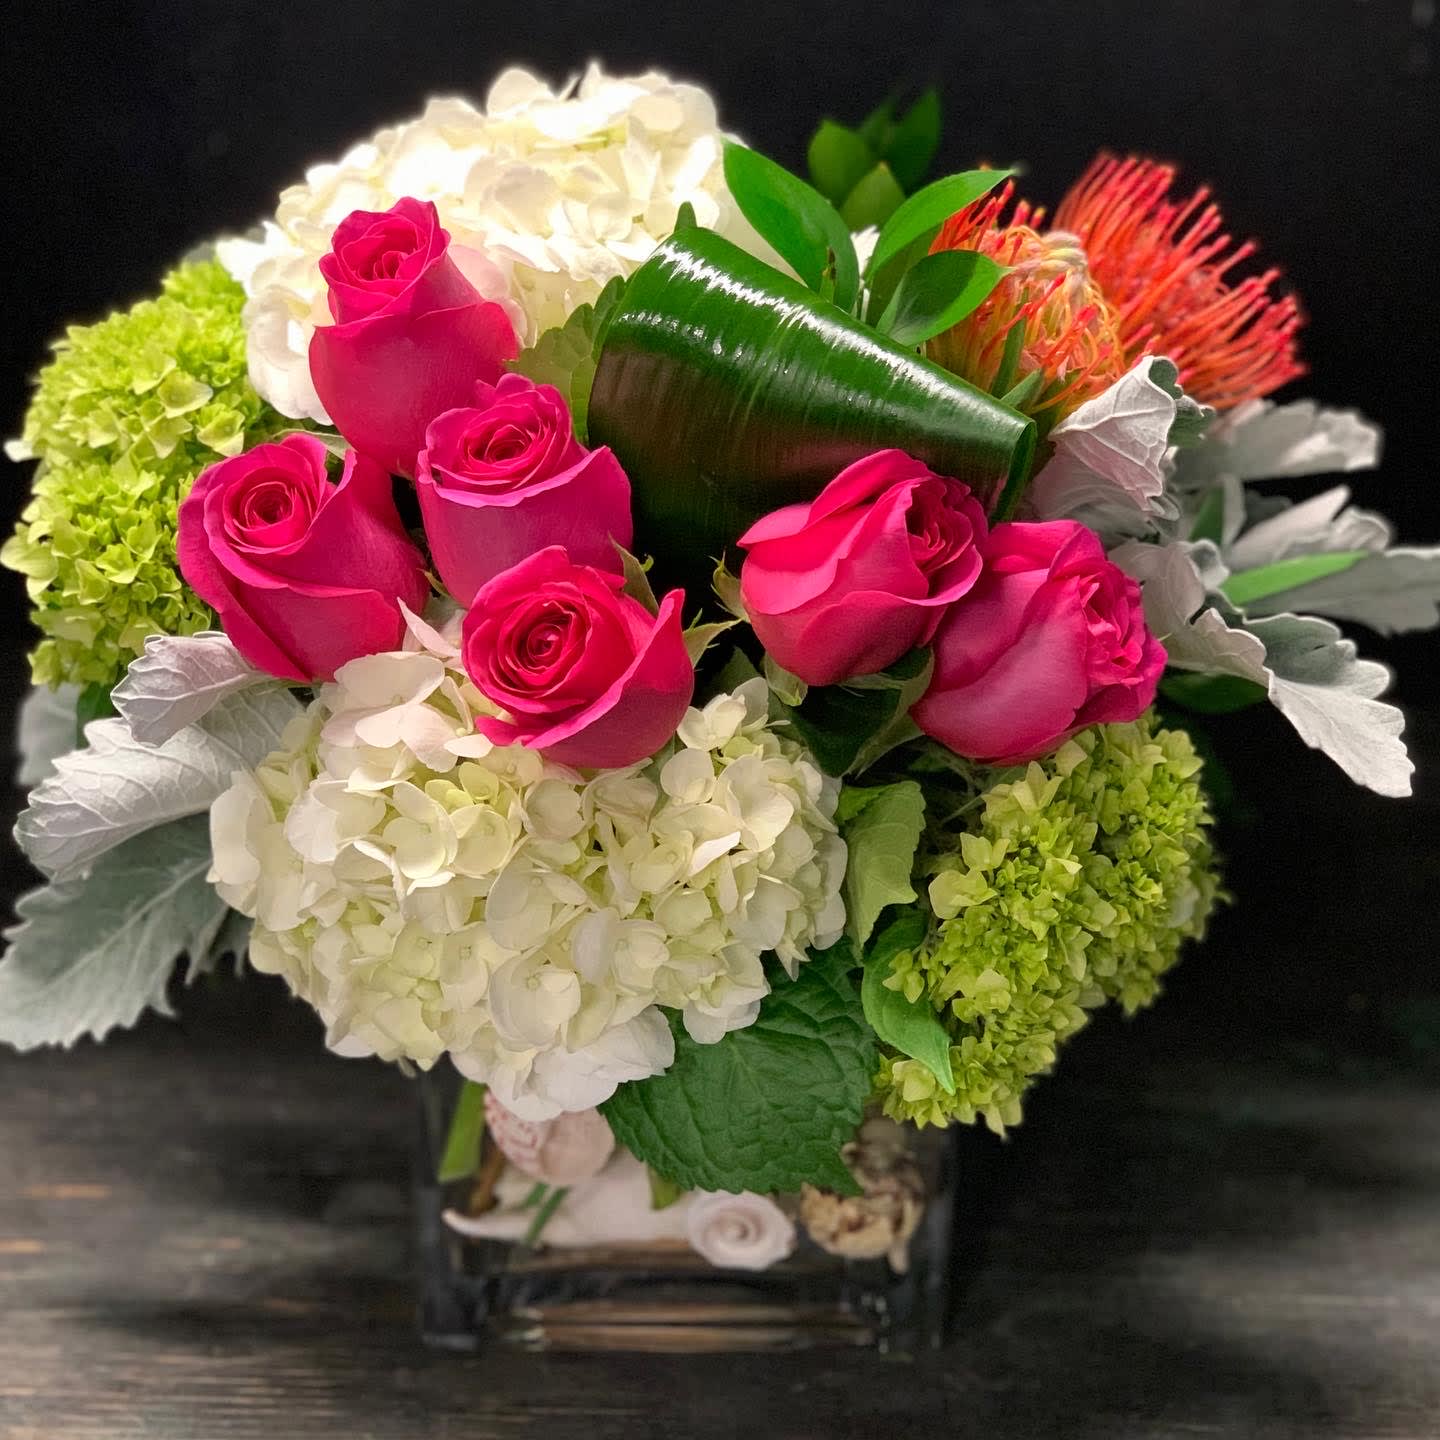 Modern Mix - A gorgeous mix of beautiful seasonal blooms artfully designed with a contemporary vibe. Blooms will vary, but the overall feel and design will remain the same. Please call if this is a concern.